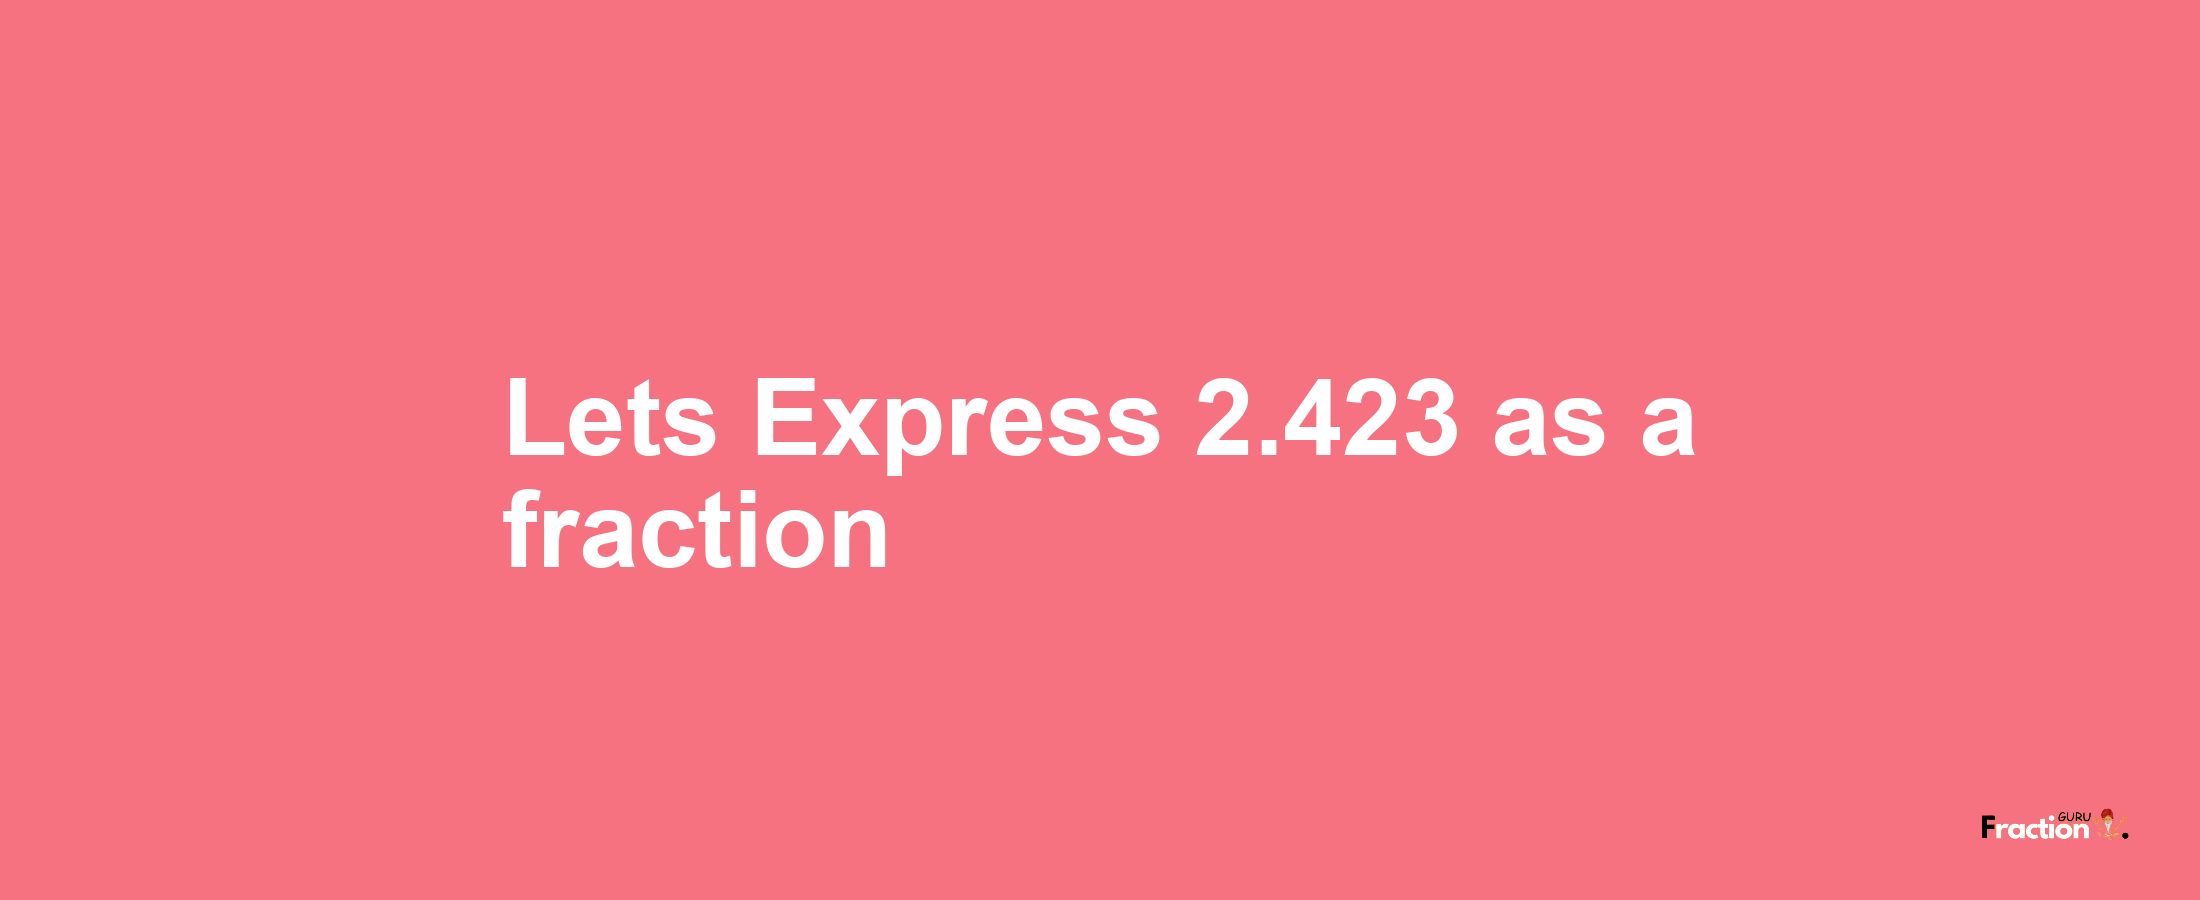 Lets Express 2.423 as afraction